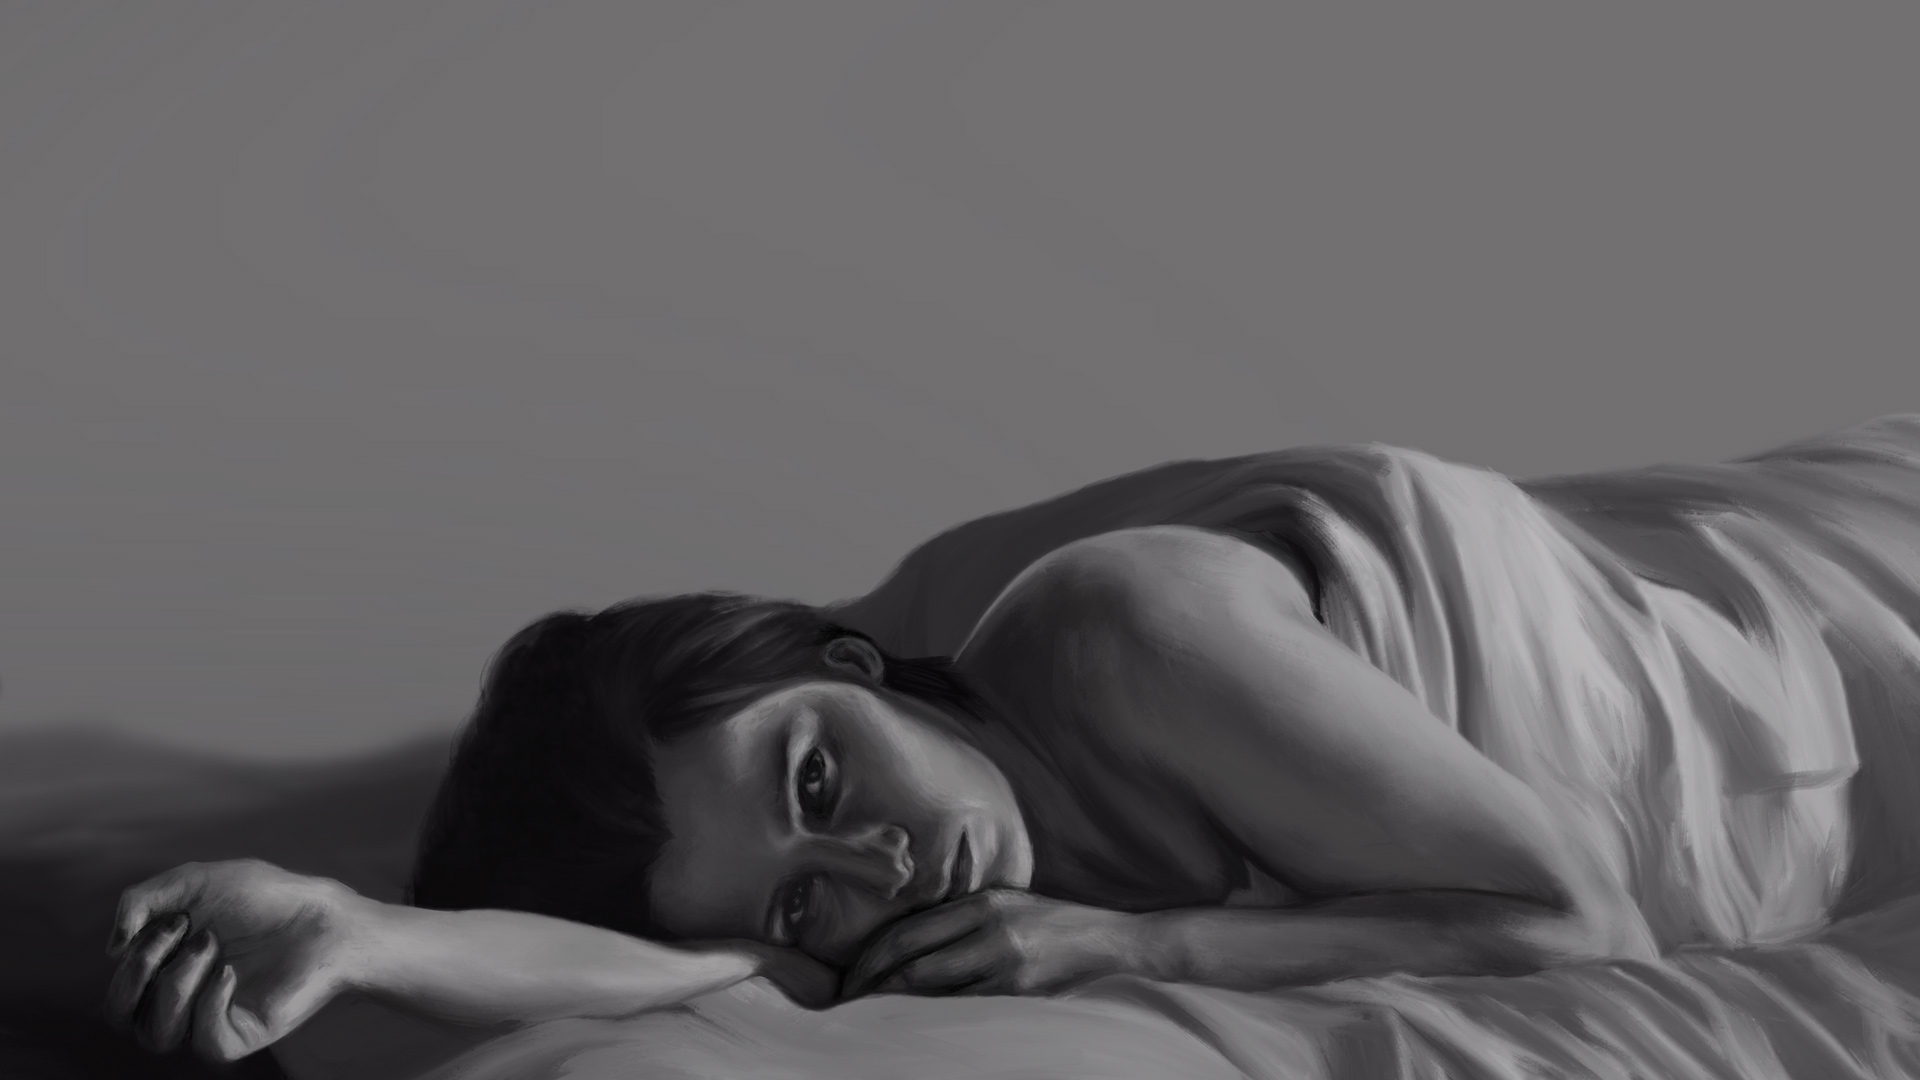 Black and white digital painting of a woman in bed by Coralie Mayer.